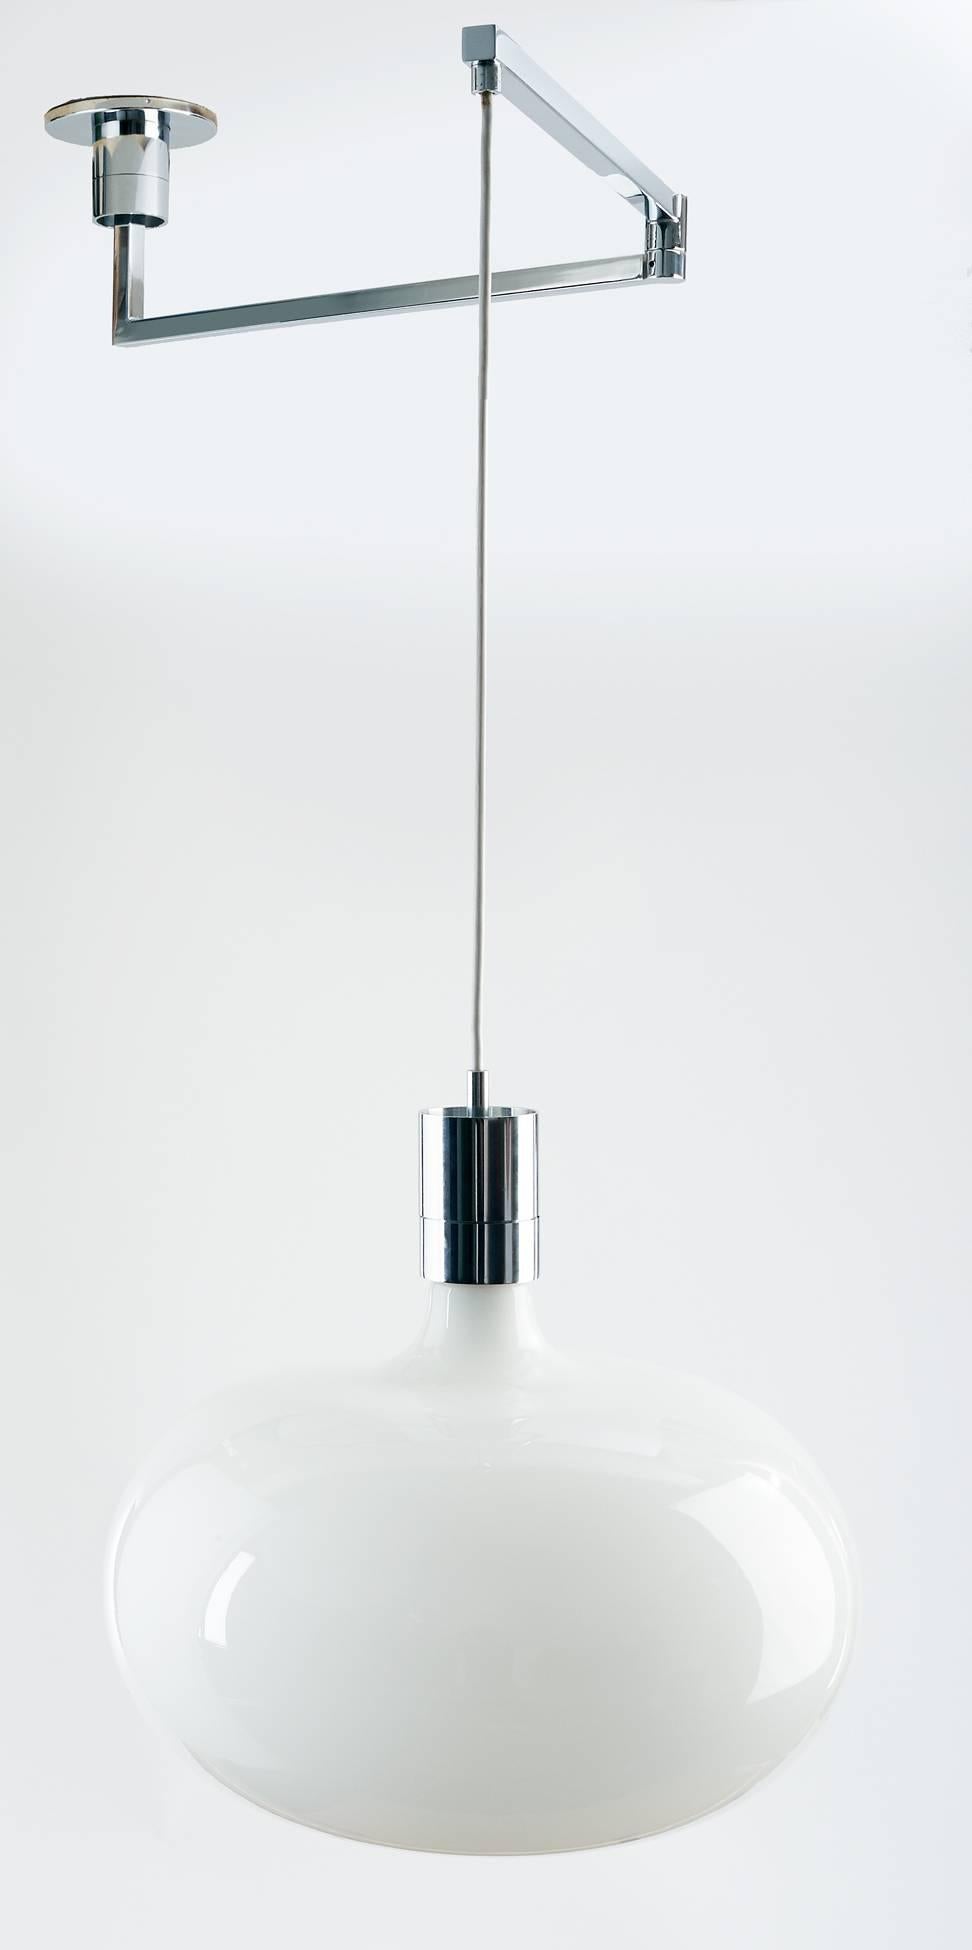 Franco Albini (1905–1977)

Minimalist, early model adjustable-height pendant by Franco Albini, with a movable chrome-plated swing-arm and a sleek, dimpled opaline glass shade. Height is adjustable; maximum height is 45 inches. 